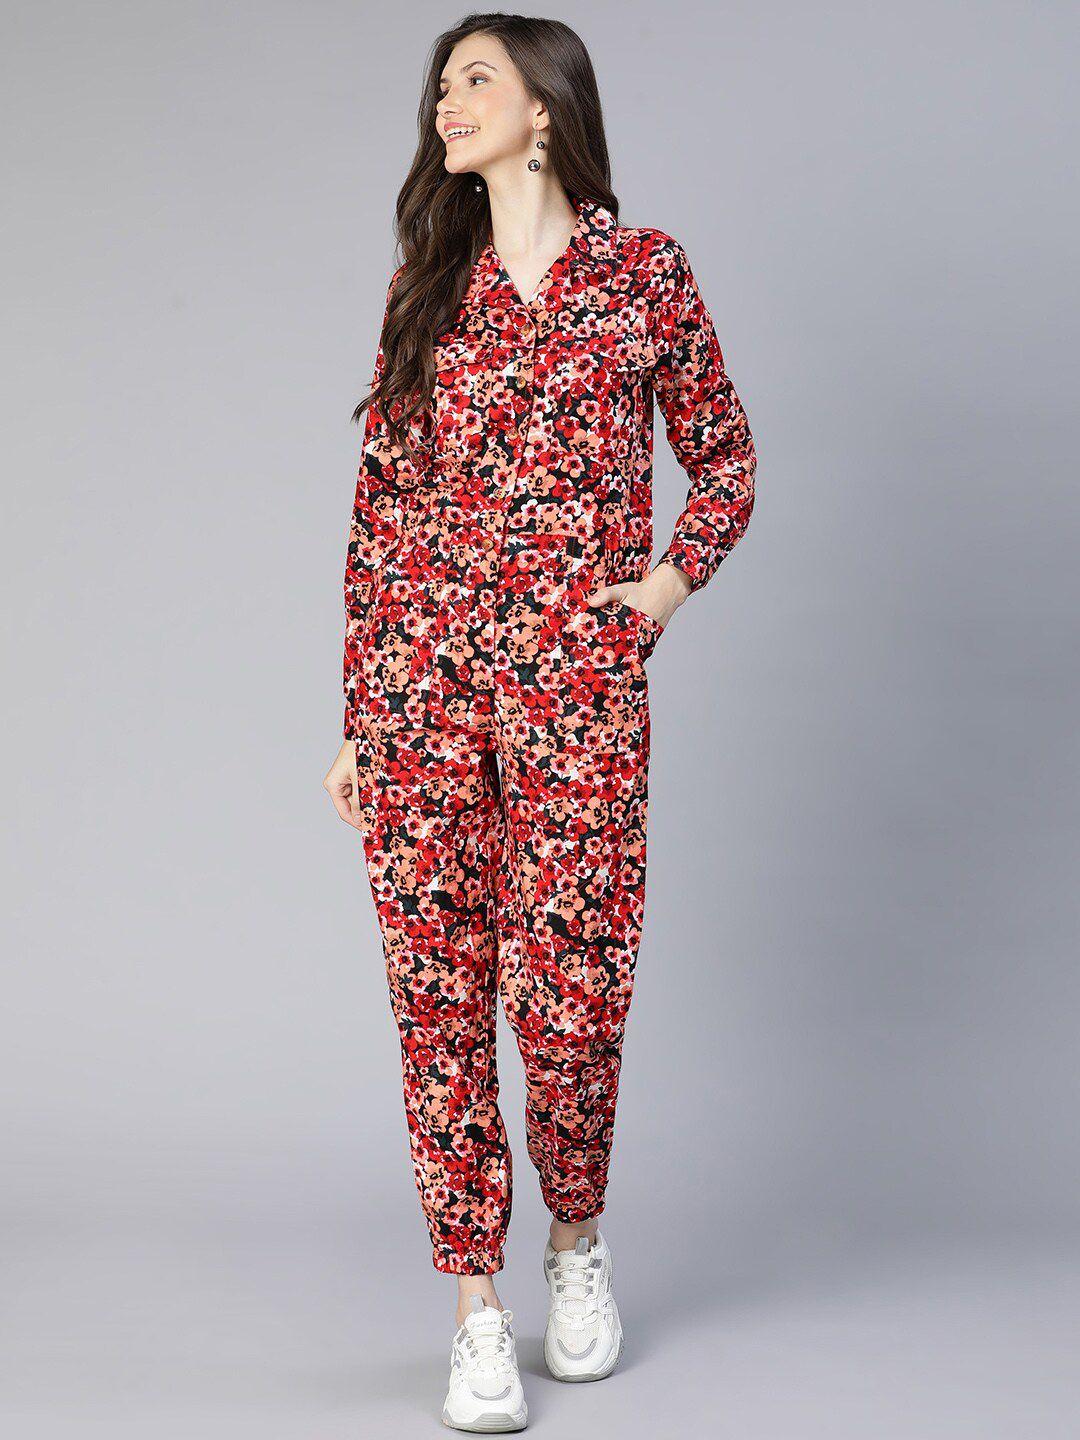 oxolloxo-women-red-&-black-printed-basic-jumpsuit